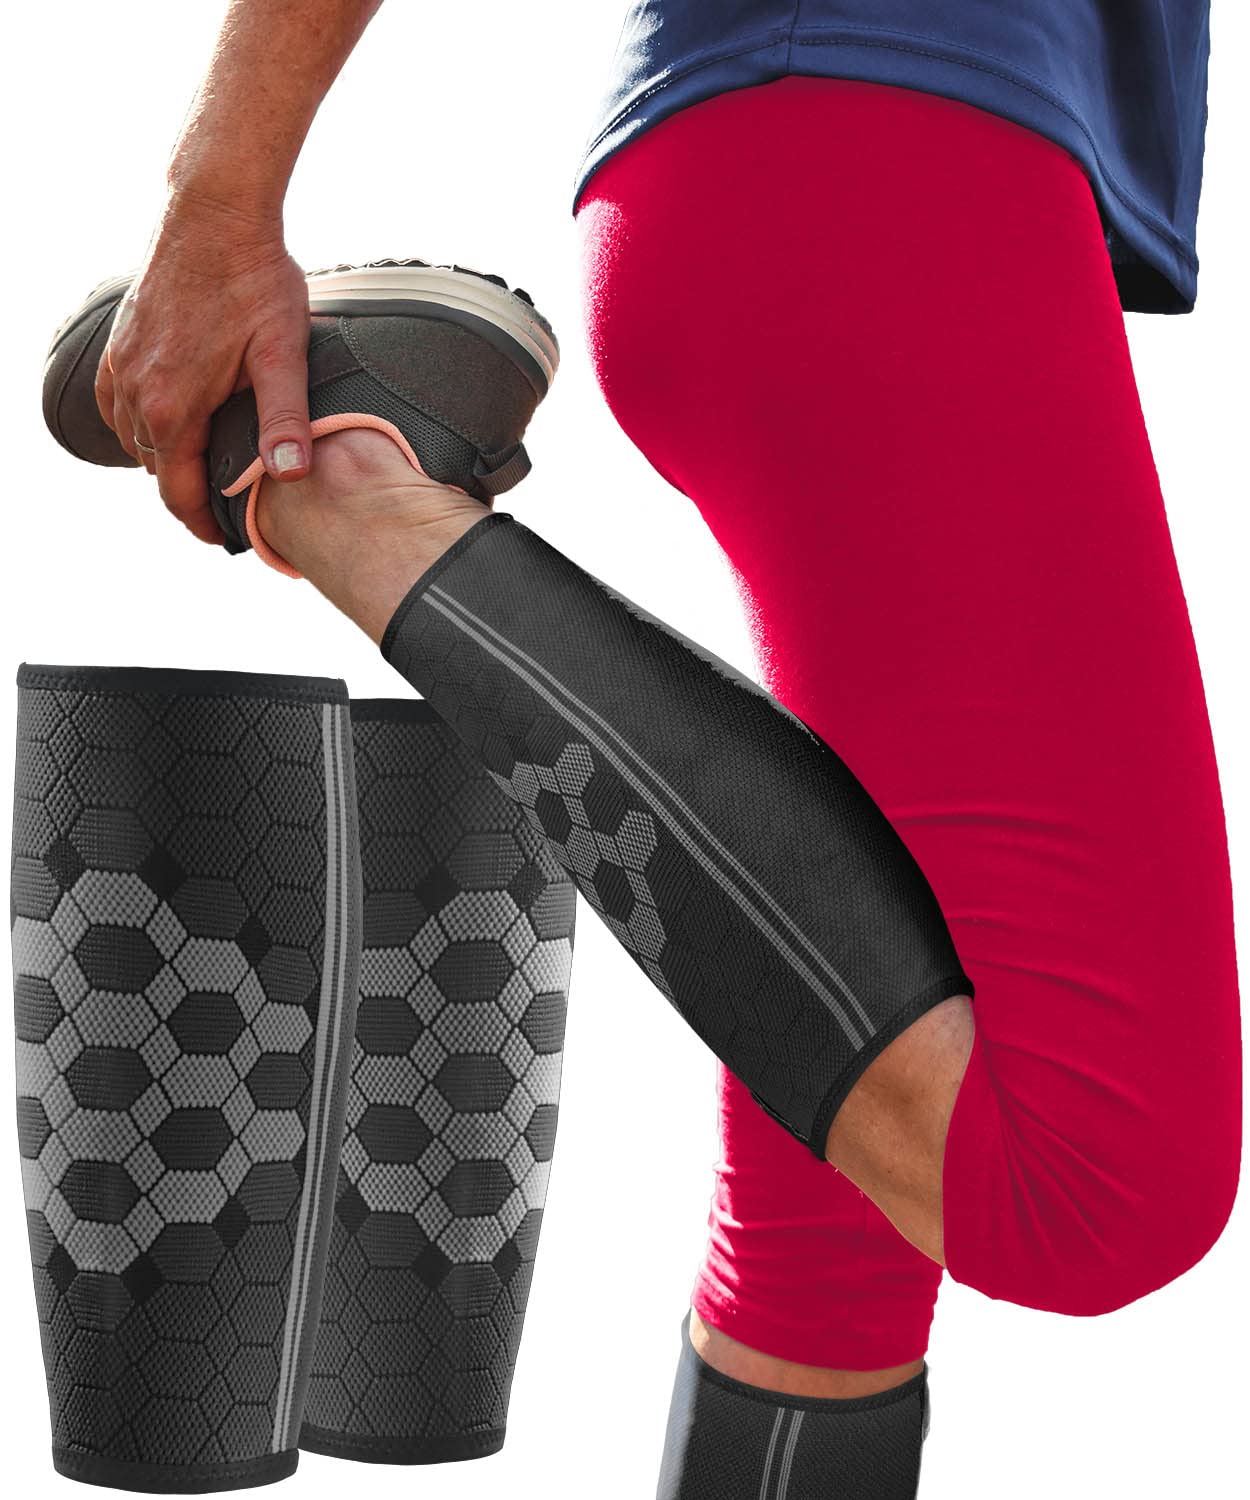 Calf Compression Sleeve by SPARTHOS (Pair) Leg Compression Brace